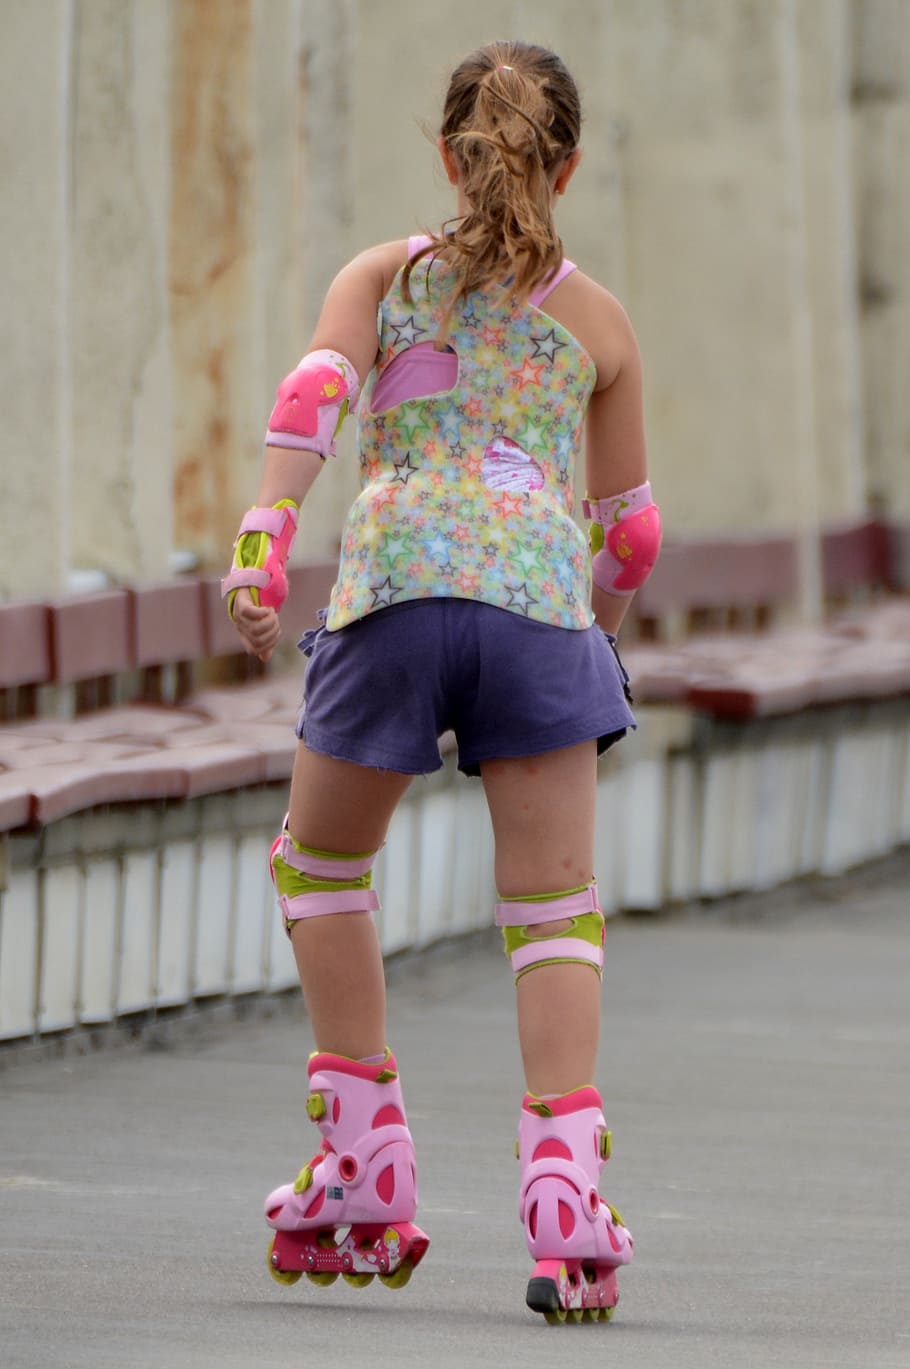 girl playing on the road during day time, child, roller skate, HD wallpaper